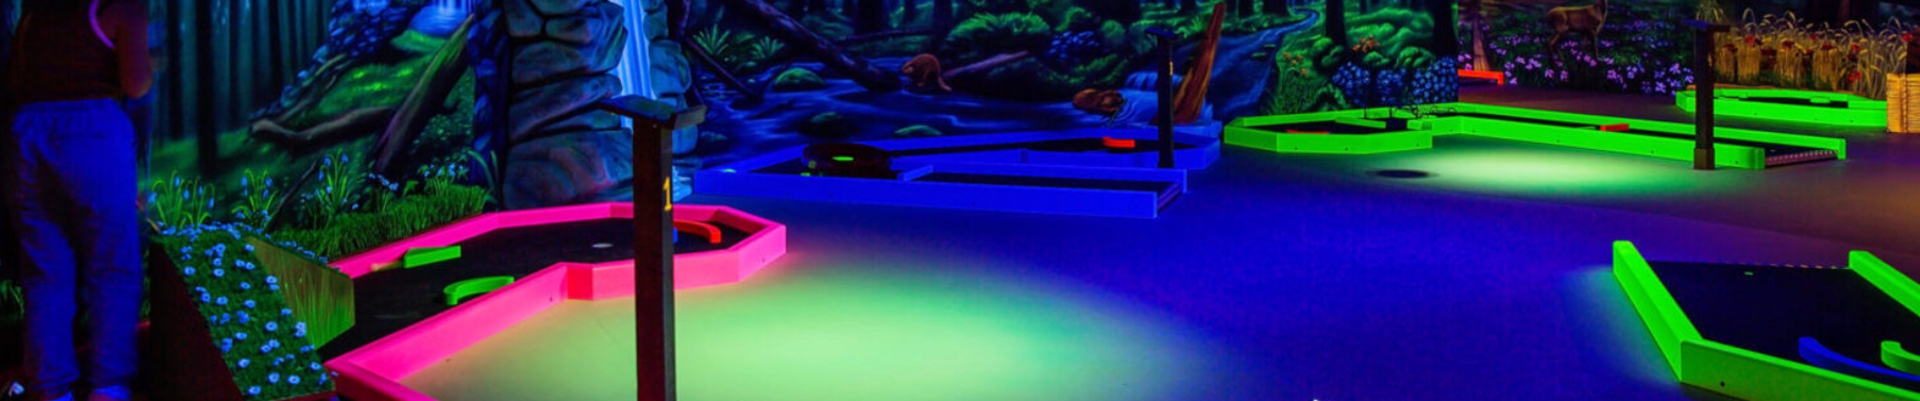 glowgolf is an active experience suitable for people of all ages, from young children to grandmothers., adventure in space, on earth or underwater, ski down a snowy mountain or head off in a lifelike bow battle., darts are extremely simple and do not require special knowledge - everyone can do it!, there are 3 professional tables waiting for you., you don't need anything but a good mood and pleasant company for the bowling, and we'll take care of the rest., whether you have a birthday, a bachelor party or a bachelorette party, a sunday with your family or a blue monday., you will be welcomed to the cosy lounge to enjoy evenings in the company of your family., 10 brunswick bowling alley in the heart of pärnu., the tracks are equipped with uv light and an interactive environment, which makes the game really interesting., Trade